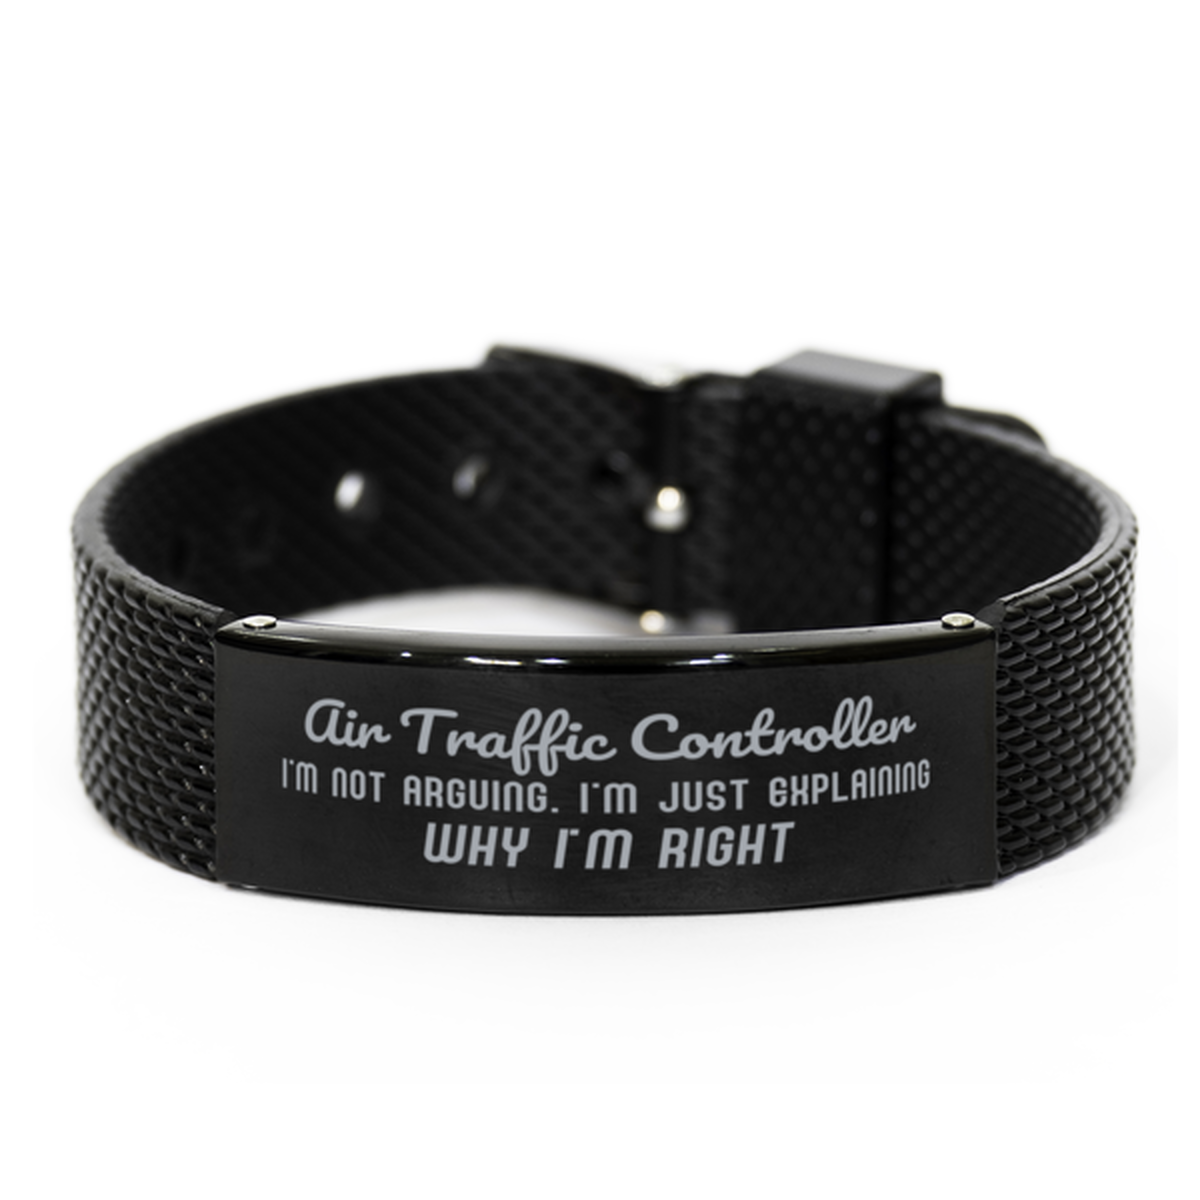 Air Traffic Controller I'm not Arguing. I'm Just Explaining Why I'm RIGHT Black Shark Mesh Bracelet, Funny Saying Quote Air Traffic Controller Gifts For Air Traffic Controller Graduation Birthday Christmas Gifts for Men Women Coworker